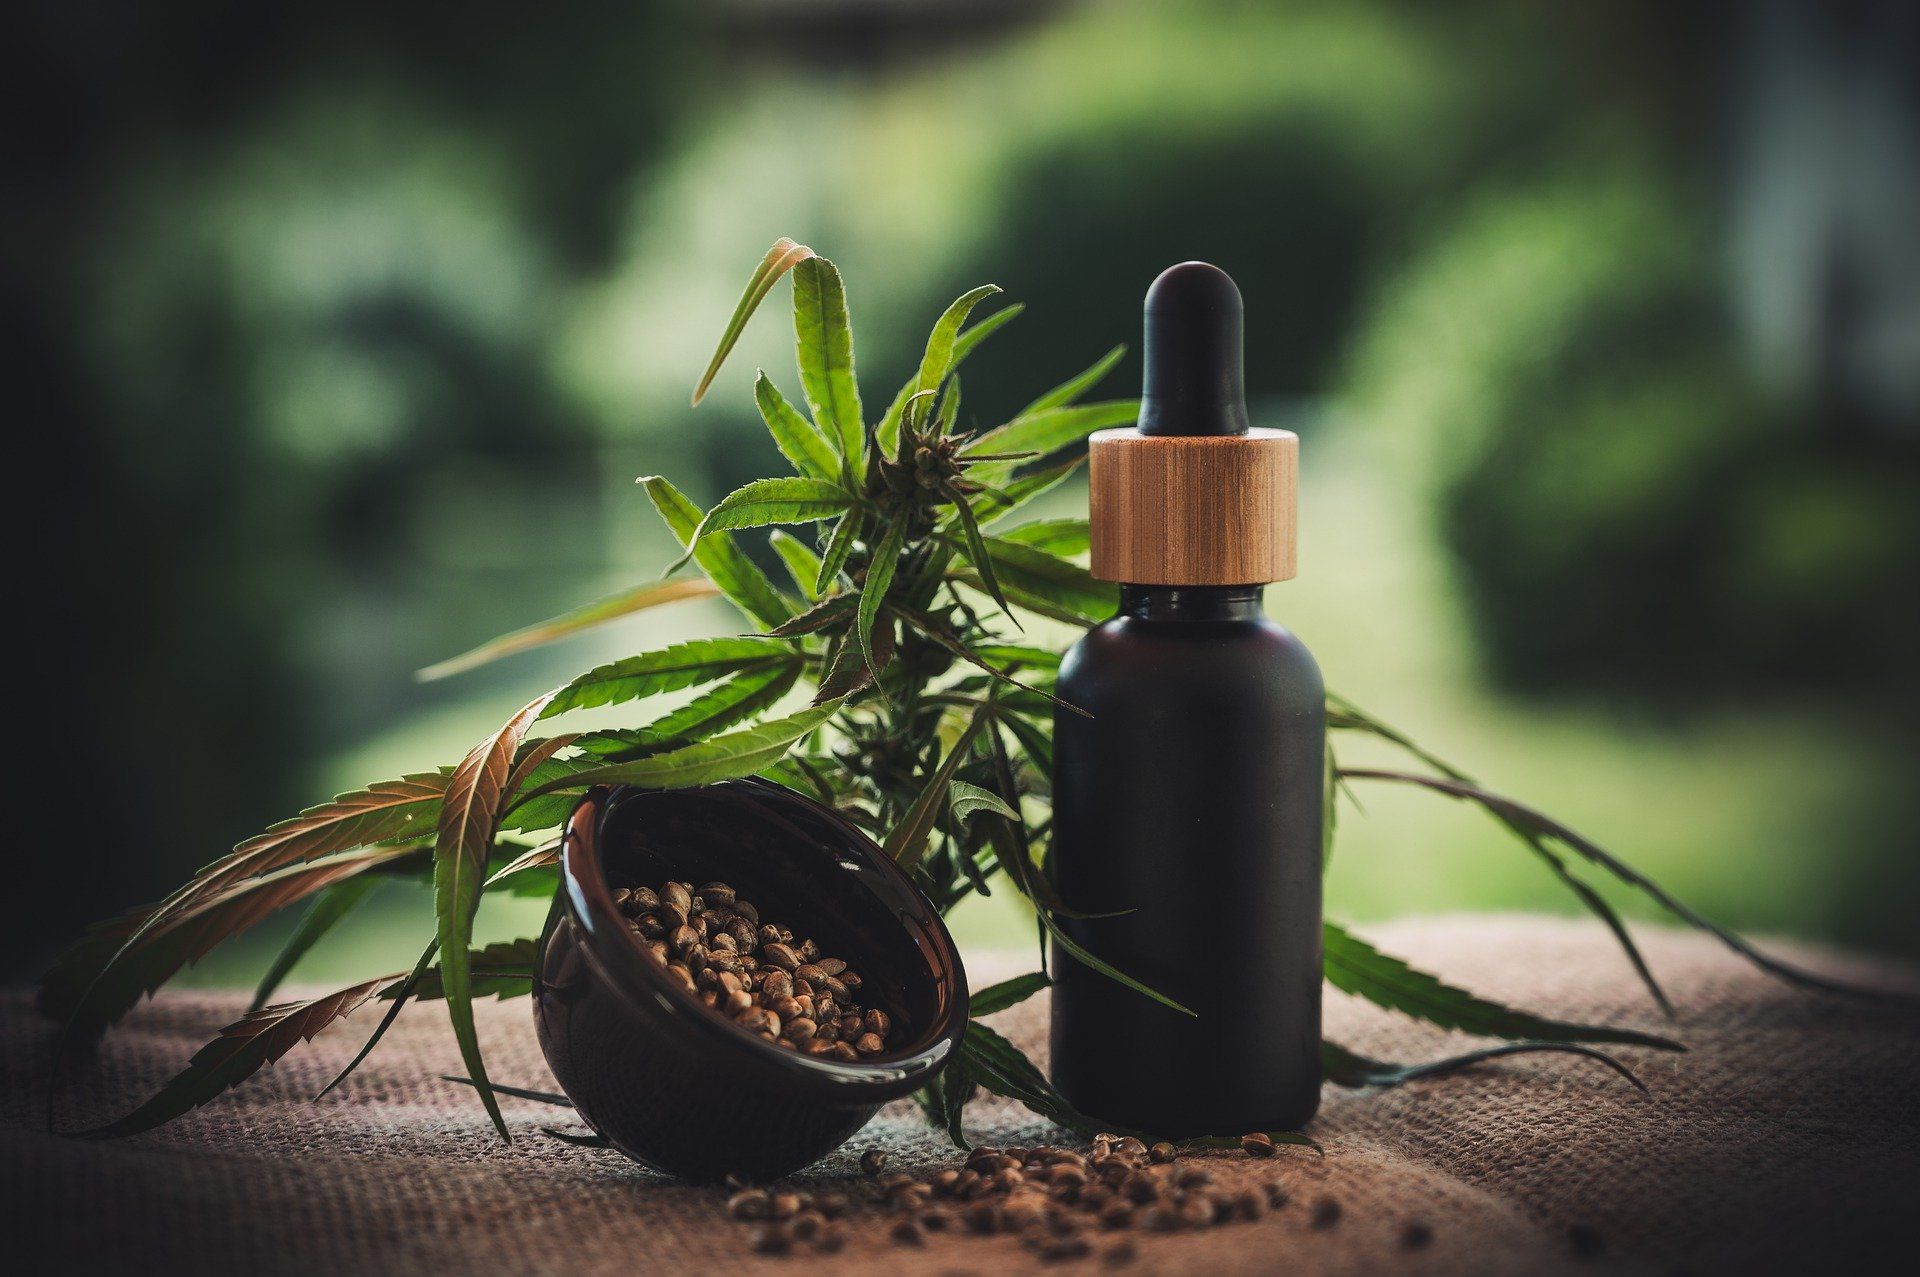 hemp-leaves-seeds-and-oil-dropper-in-shallow-focus hemp-leaves-seeds-and-oil-dropper-in-shallow-focus